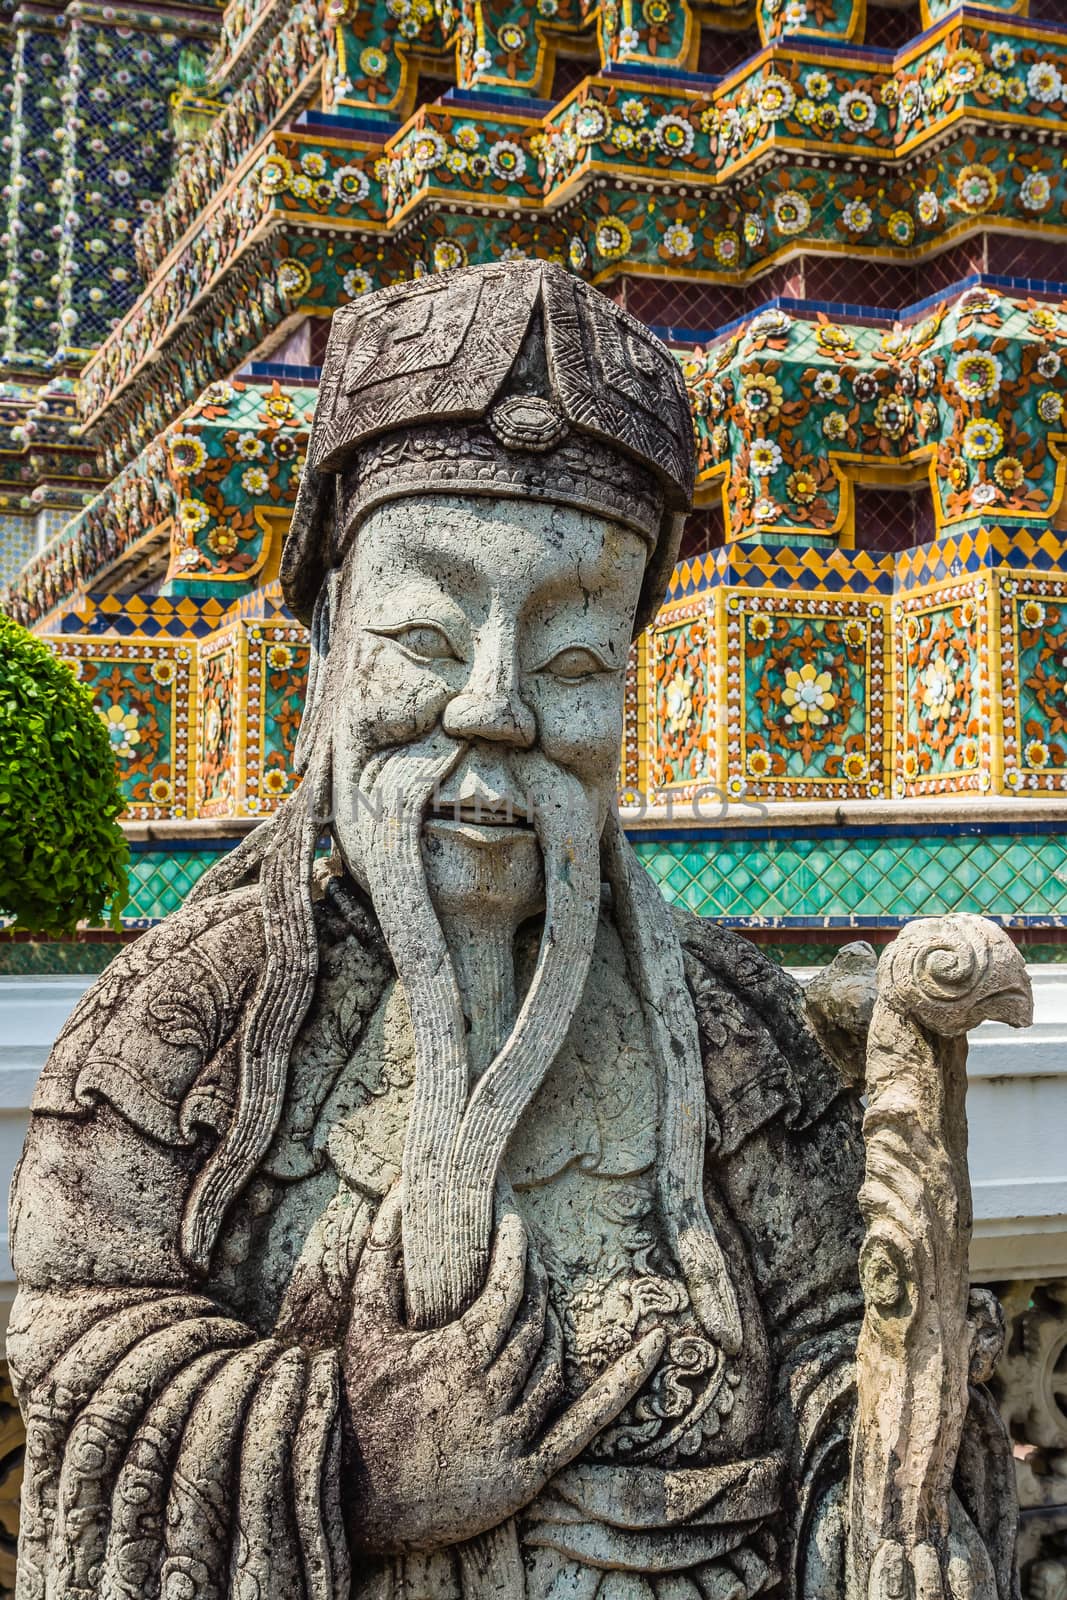 Ancient statue in the complex of Wat Pho, the Temple of the Reclining Buddha in Bangkok, Thailand.